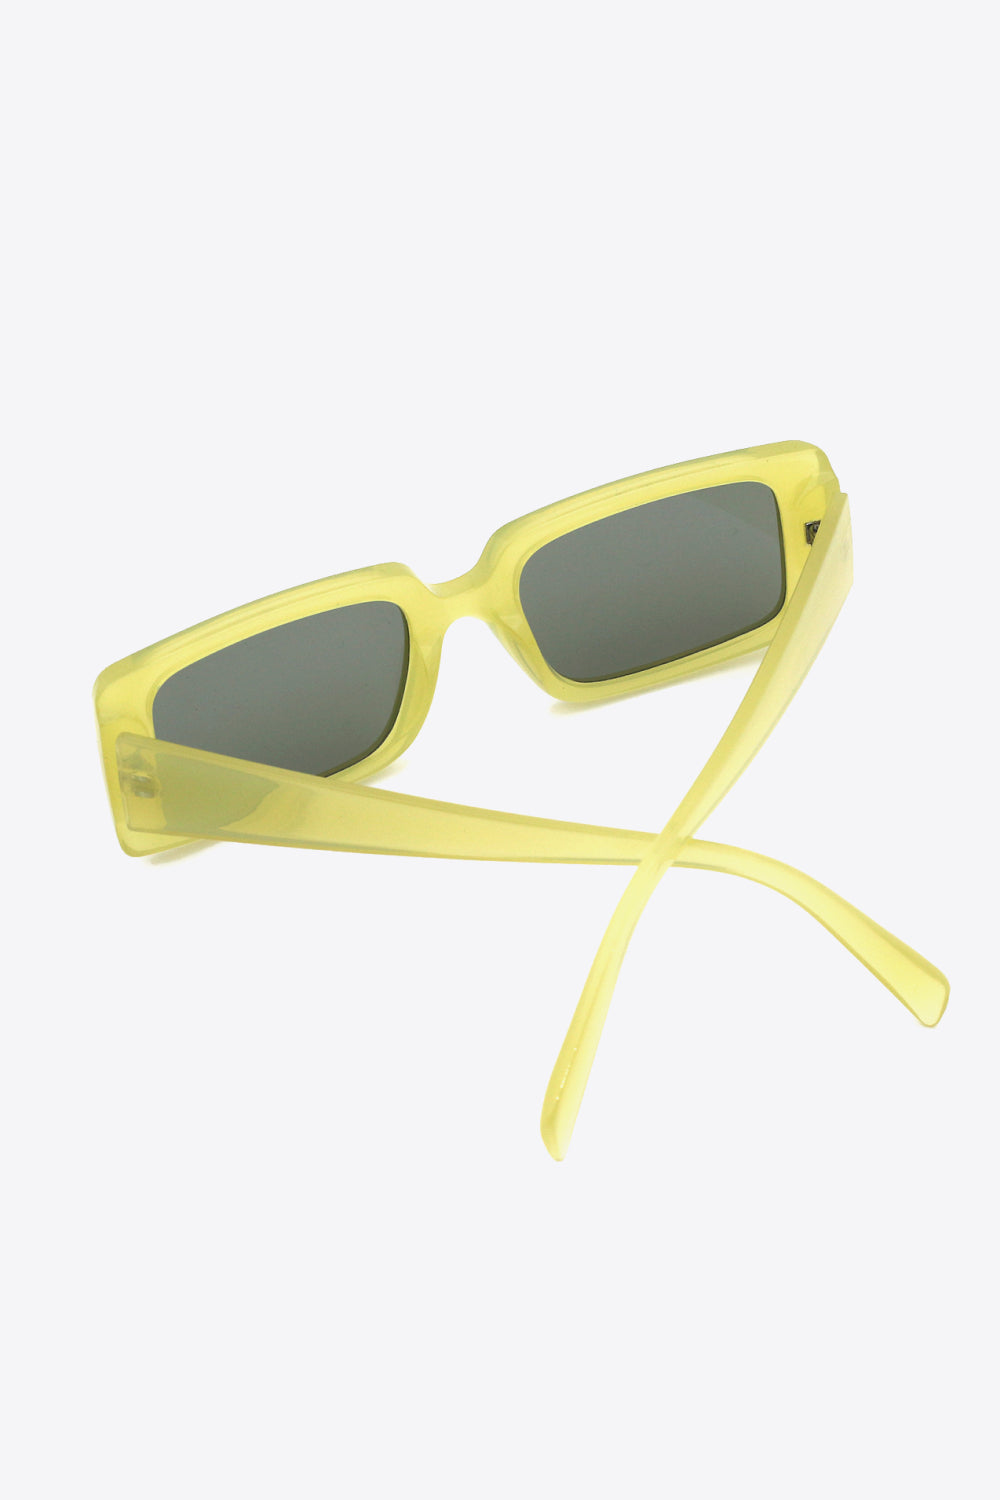 UV400 Polycarbonate Rectangle Sunglasses Print on any thing USA/STOD clothes